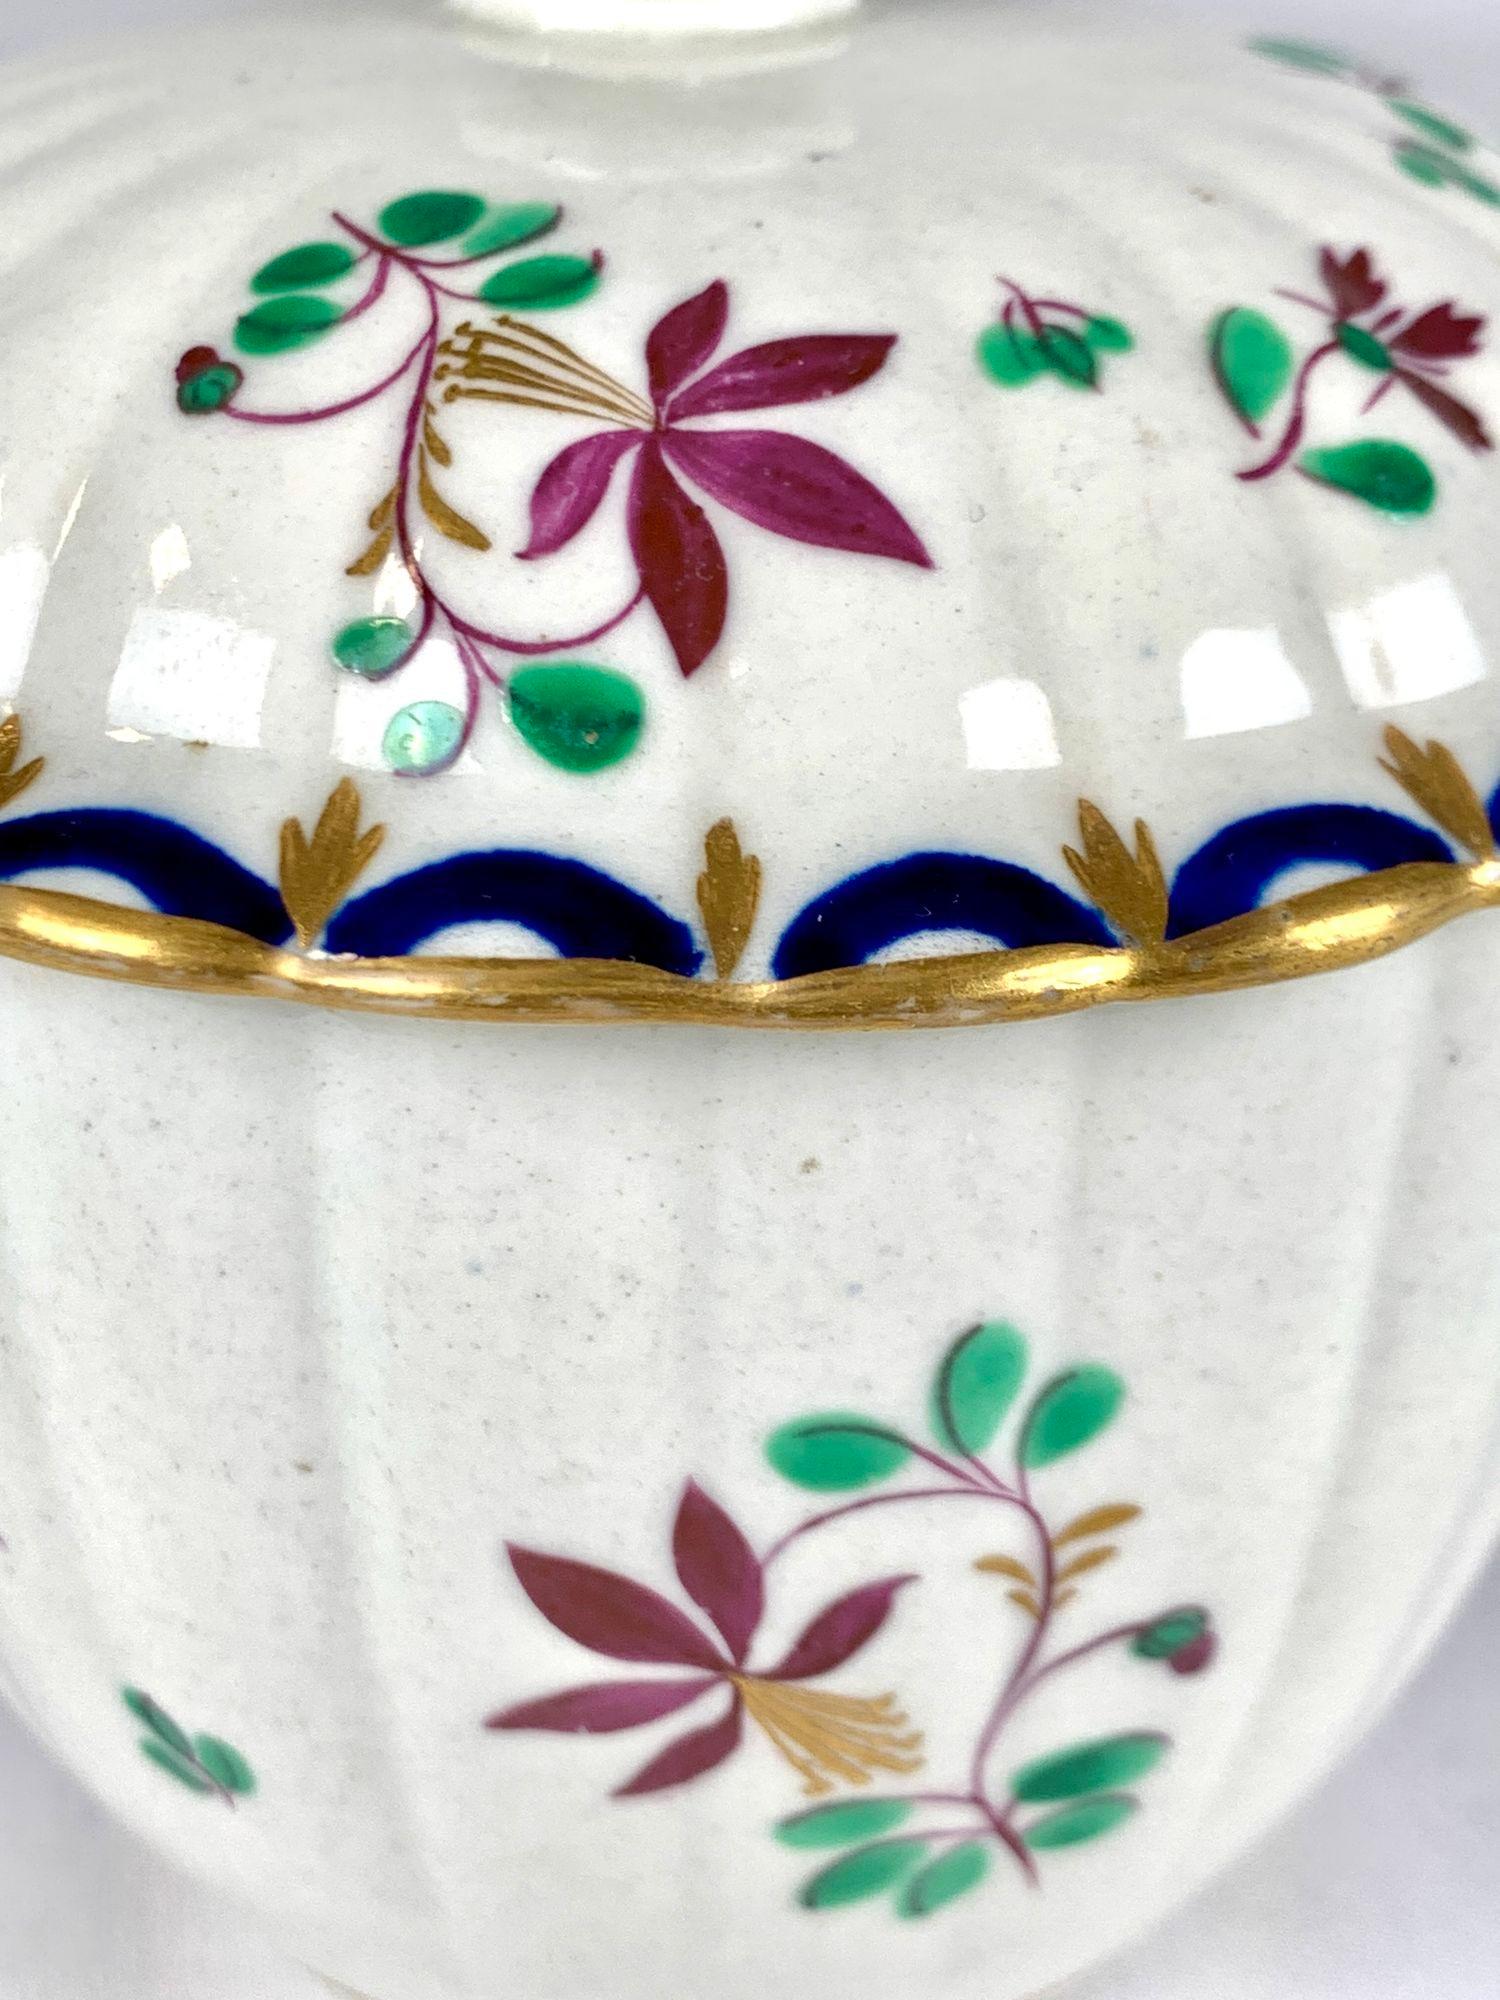 This is a hand-painted First-Period Worcester Porcelain sugar box from the 18th century.
The lively floral design is painted in green, blue, purple, and gilt.
We see purple stems and purple flowers with gilt stamens, along with green and gilt